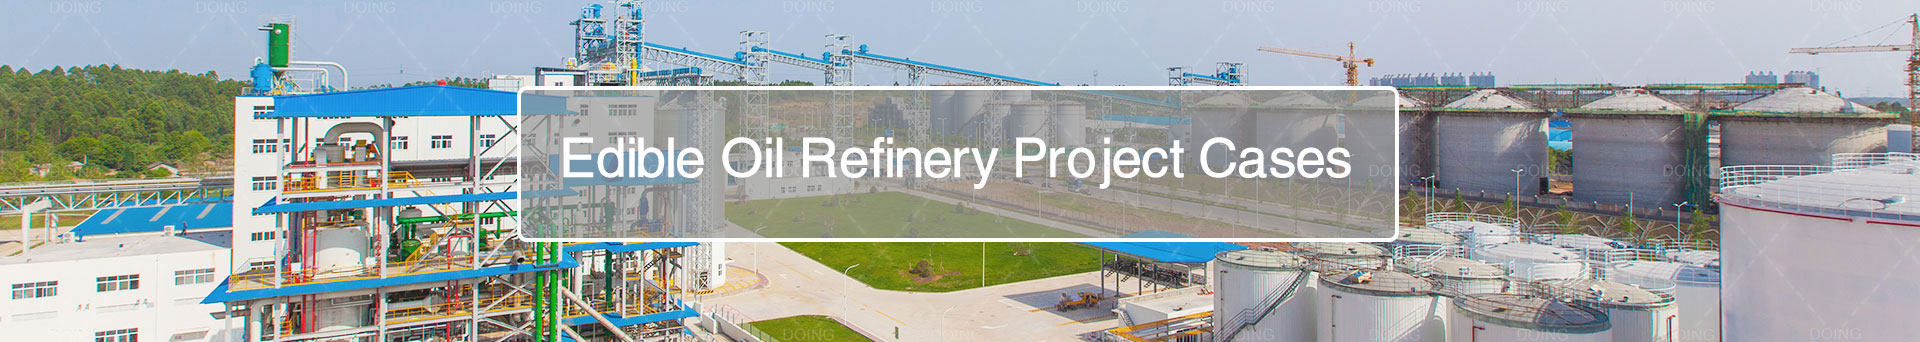 edible oil refinery plant project